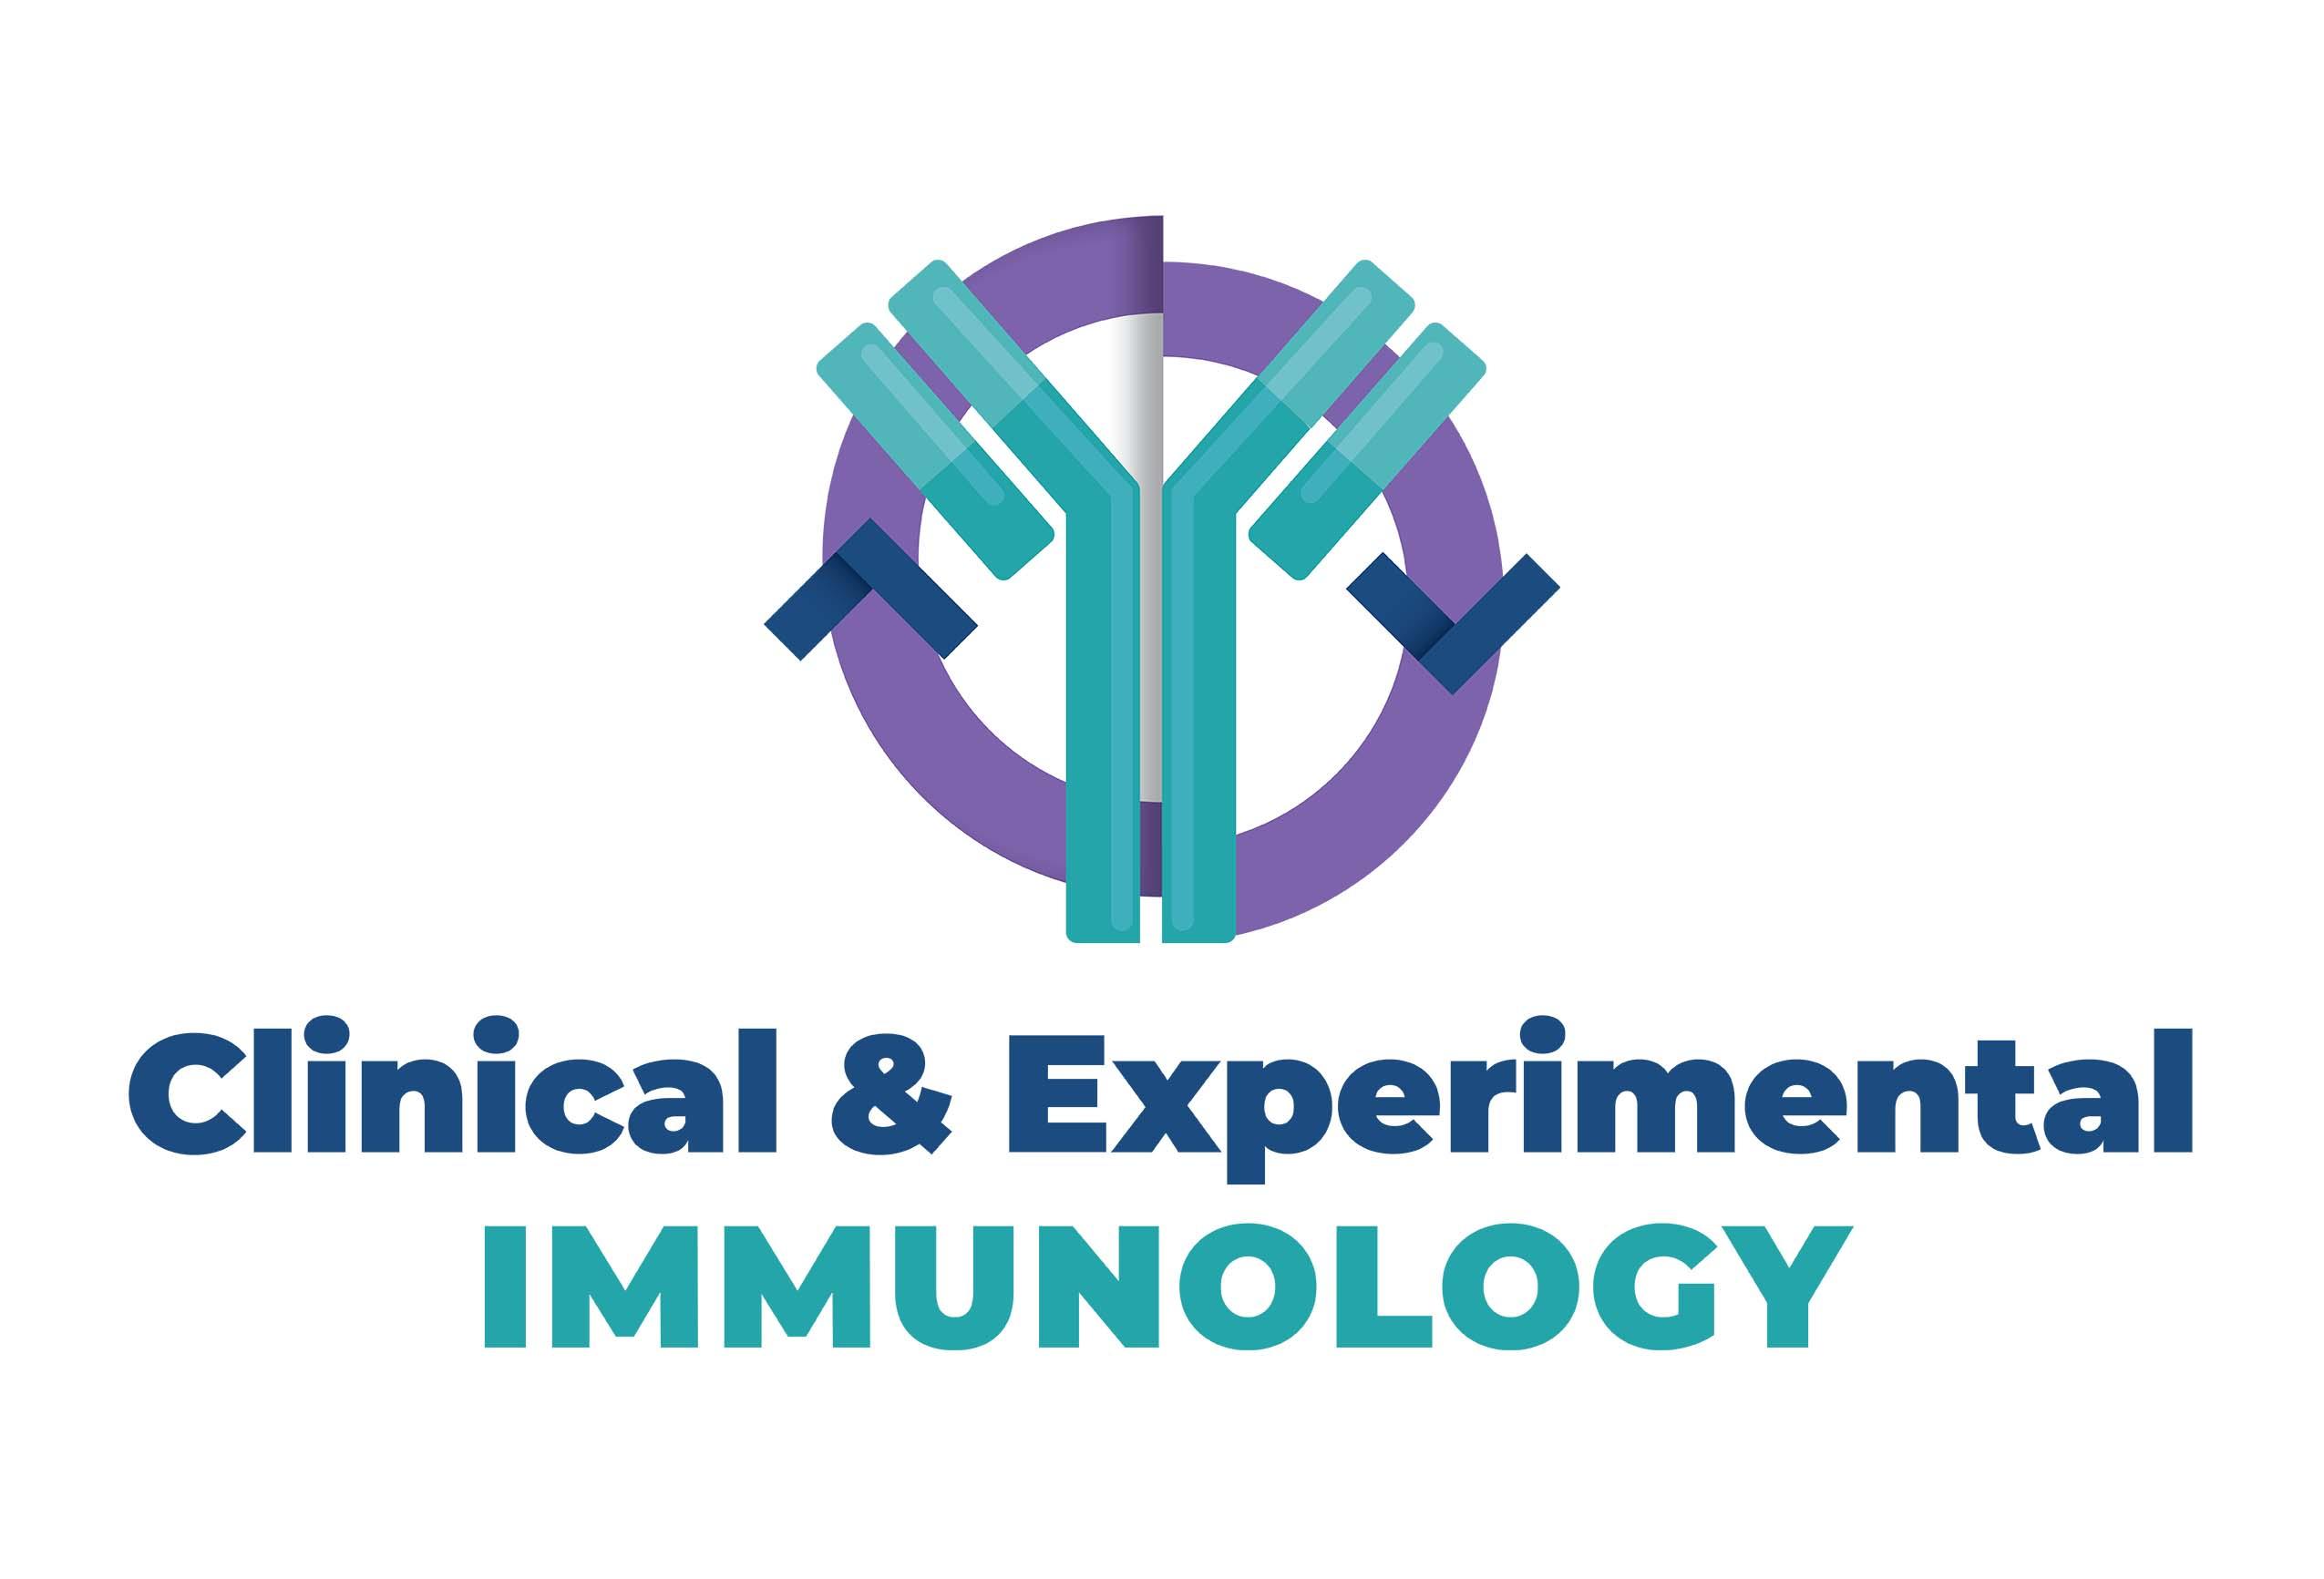 Clinical & Experiment Immunology logo